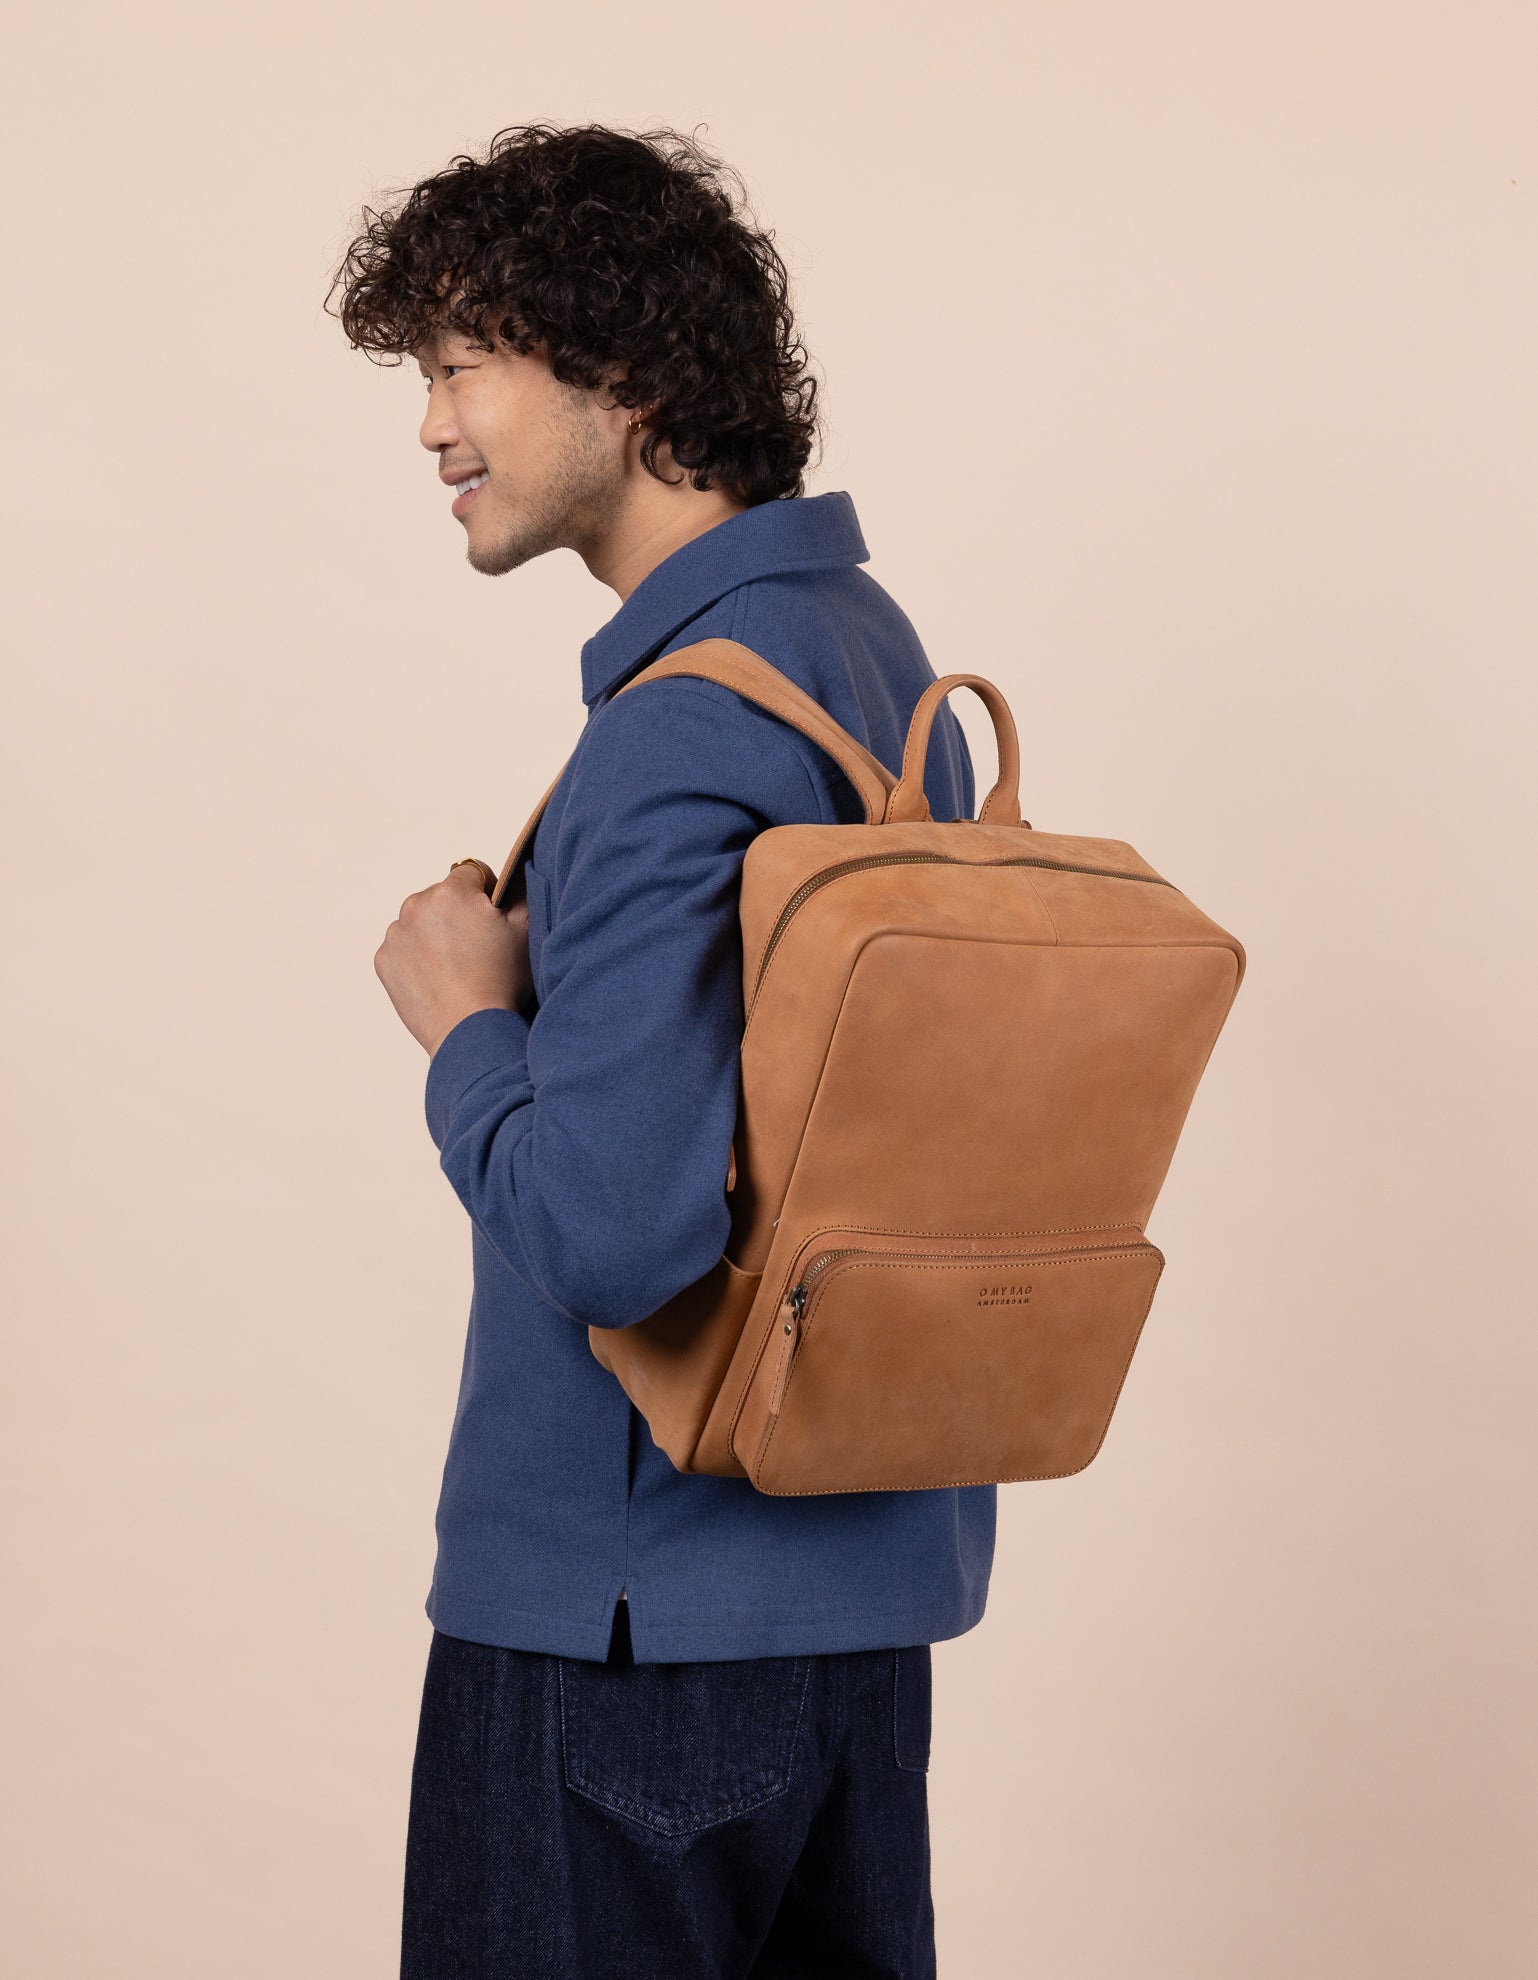 Camel Leather backpack. Model product image.